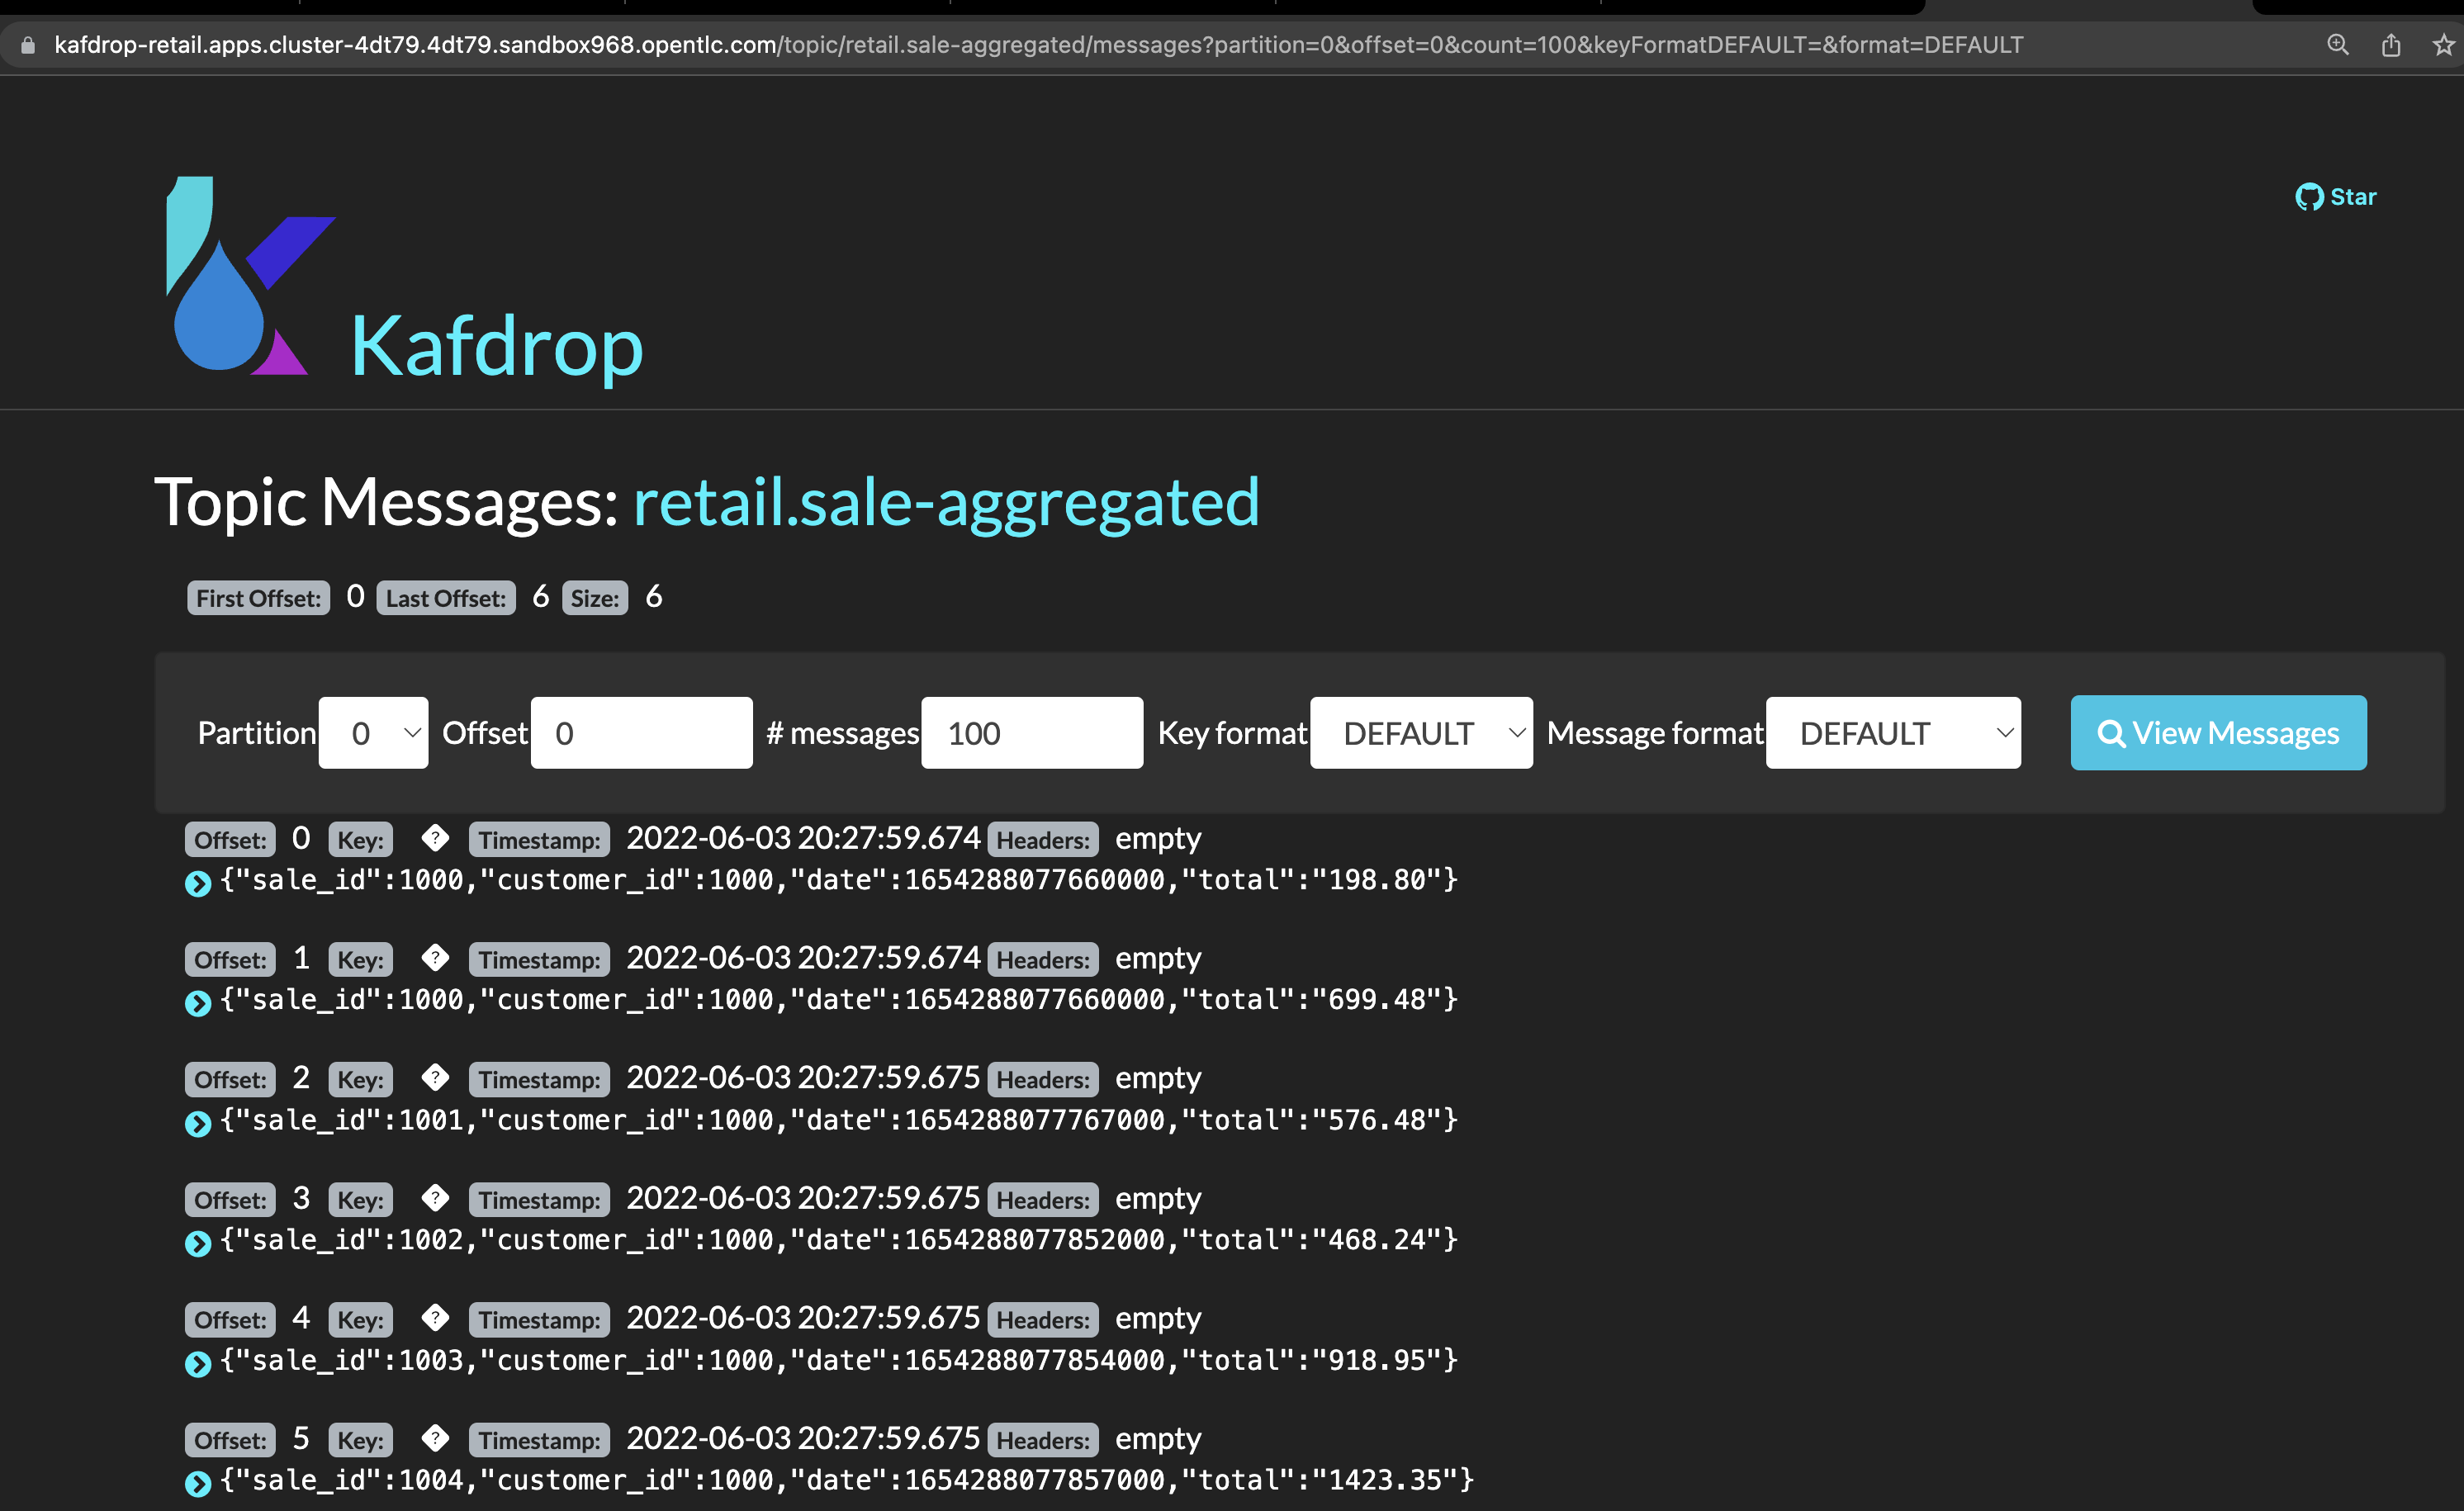 kafdrop sales aggregated messages